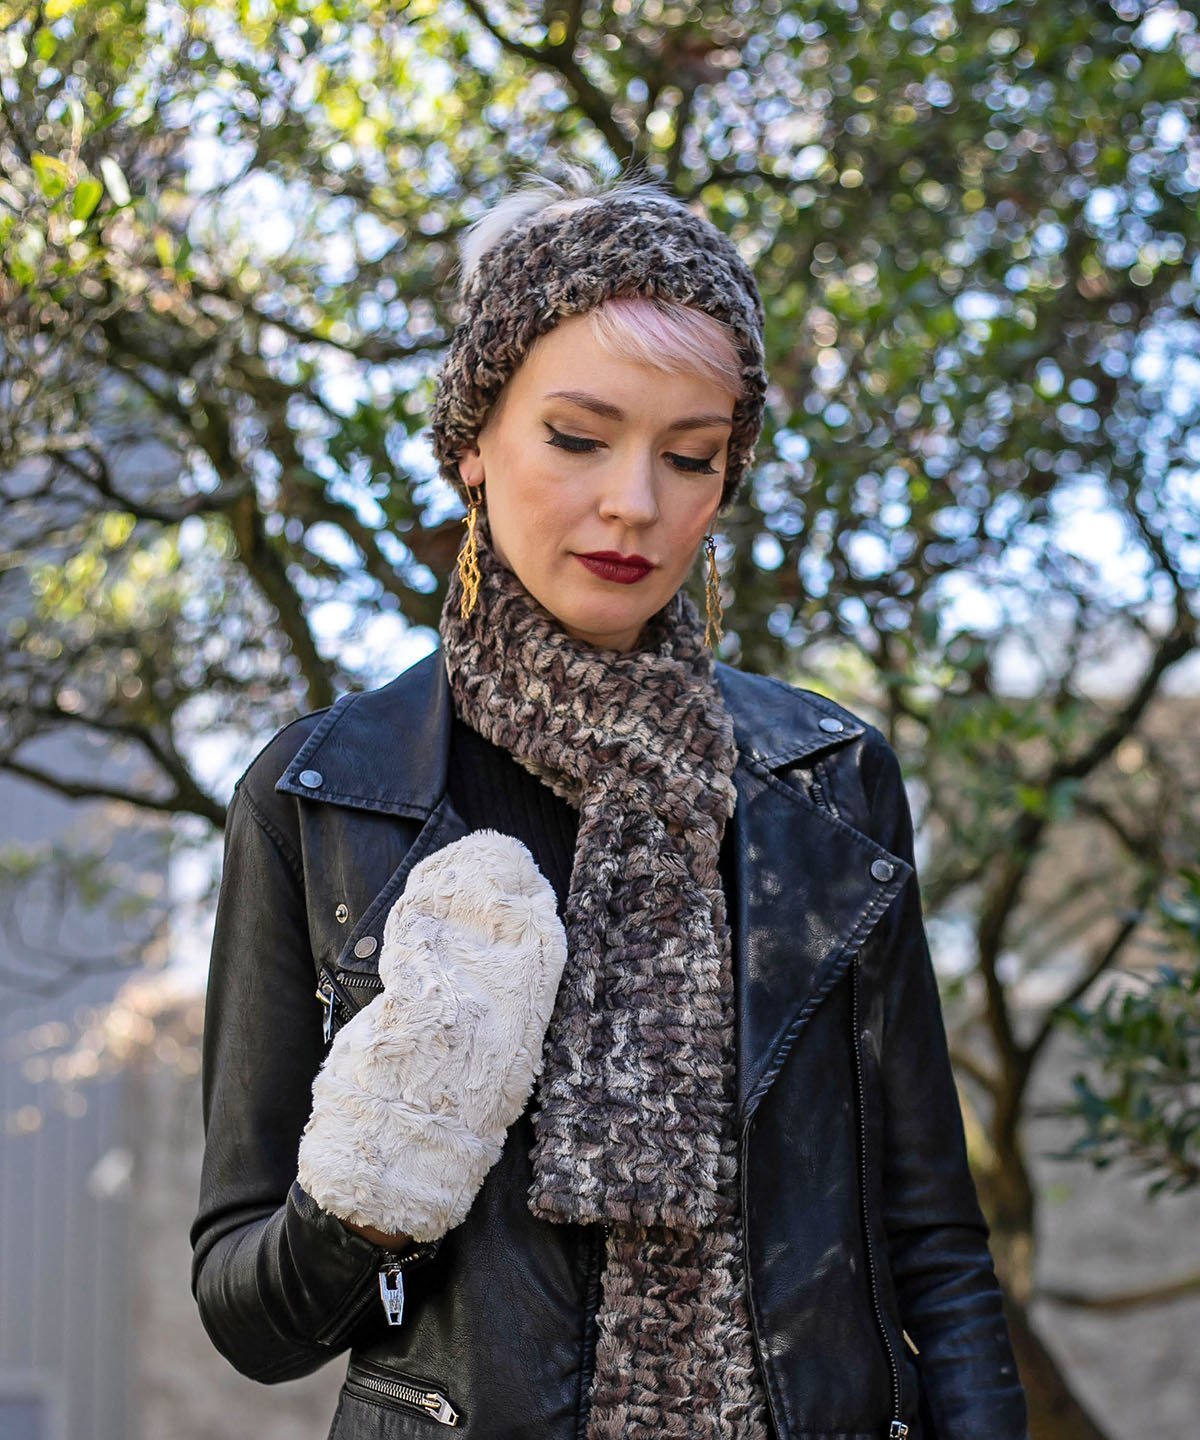 Model in front of  tree in wearing a black leather jacket and faux fur Headband, scarf and mittens | Calico, brown, chocolate and Ivory Faux Fur | Handmade by Pandemonium Millinery Seattle, WA USA